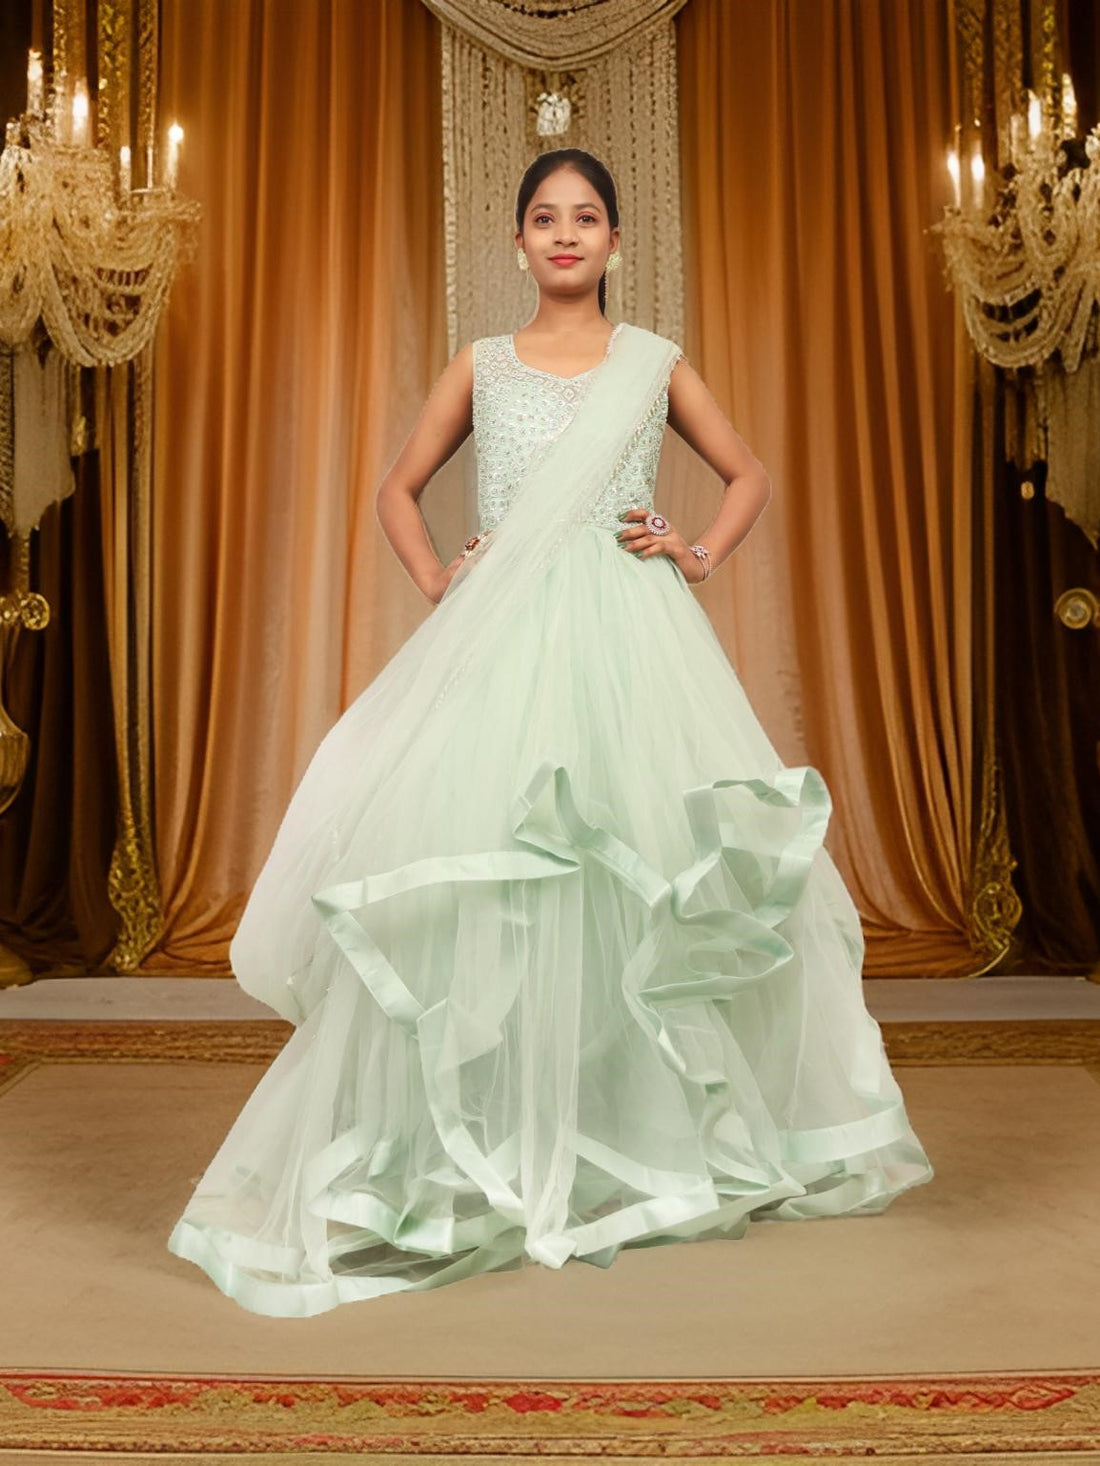 Gown with Stone &amp; Beads Work by Shreekama Pista Green Designer Gowns for Party Festival Wedding Occasion in Noida